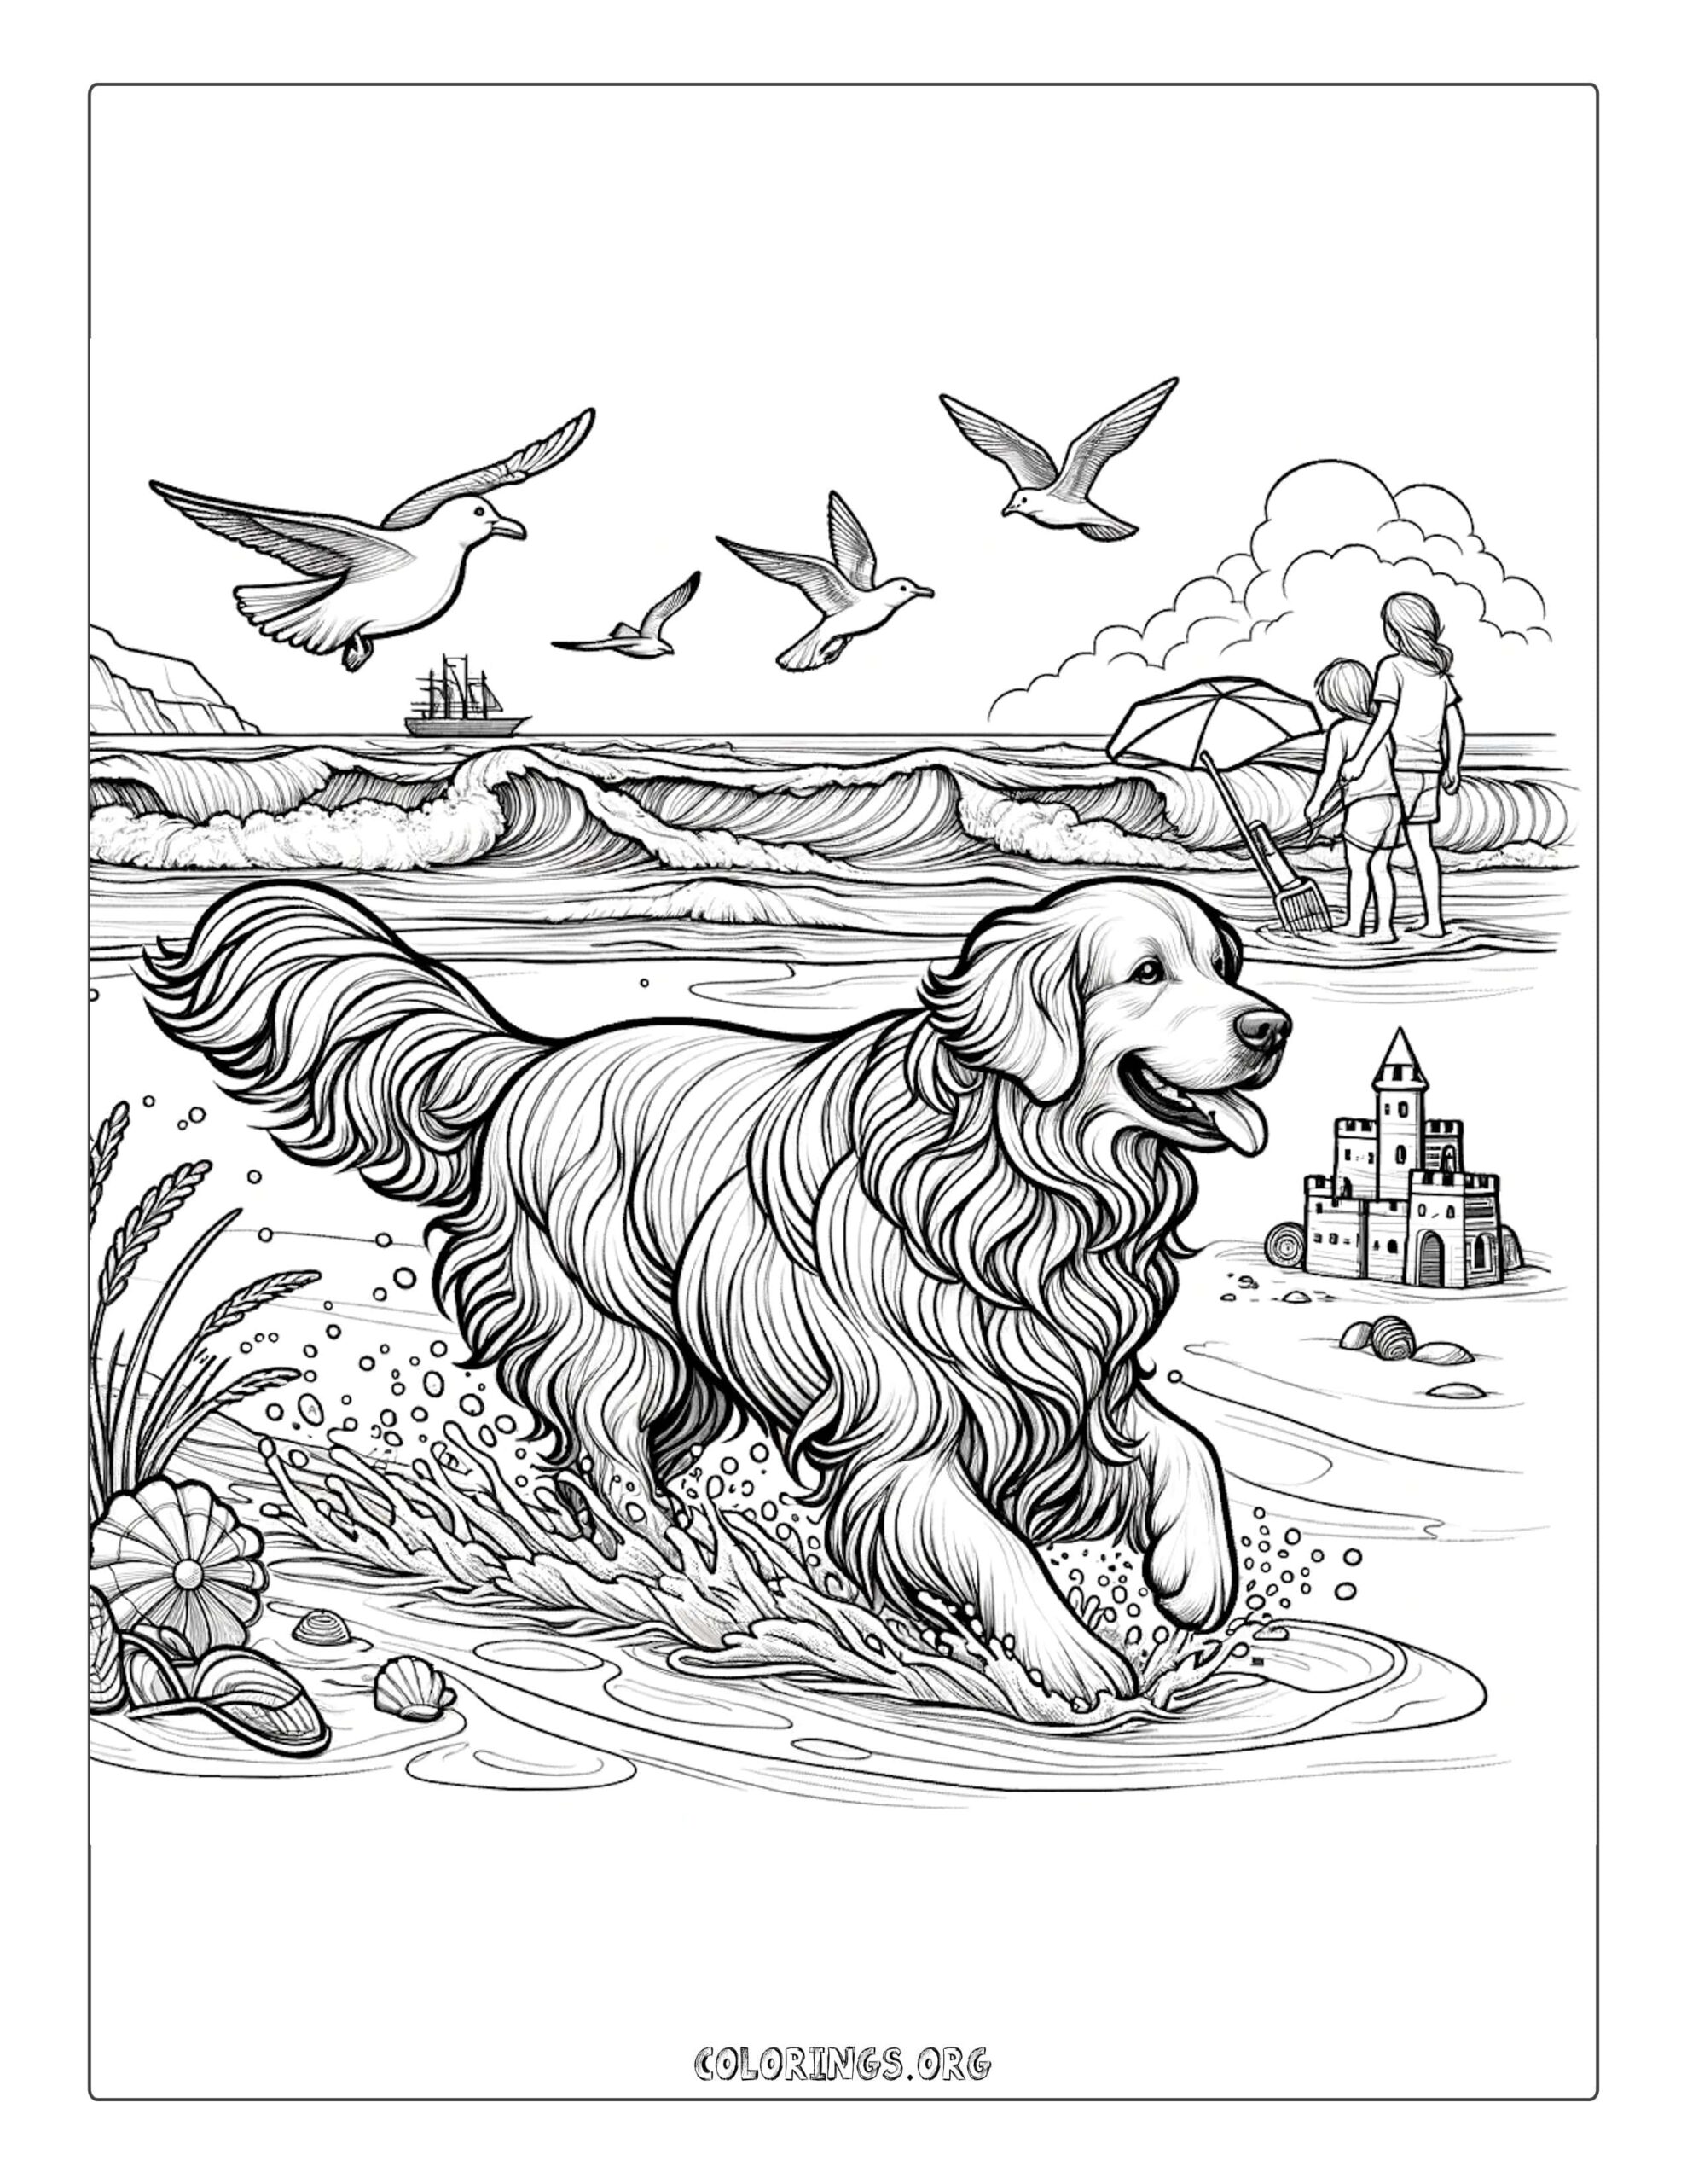 Golden retriever beach day coloring page